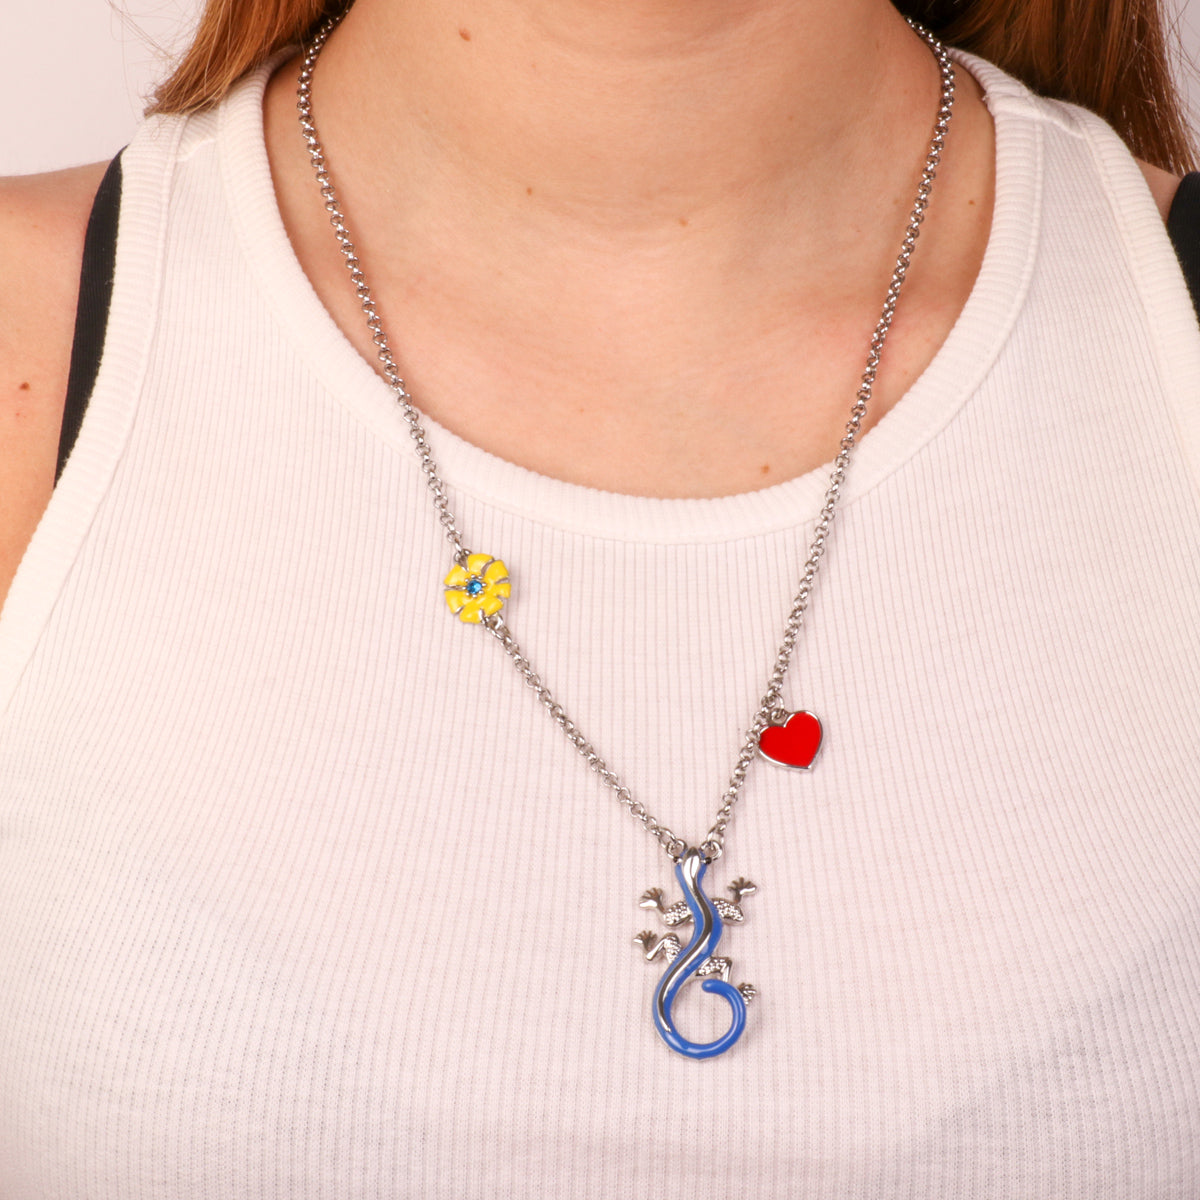 Metal necklace with central geco, yellow flower and red heart